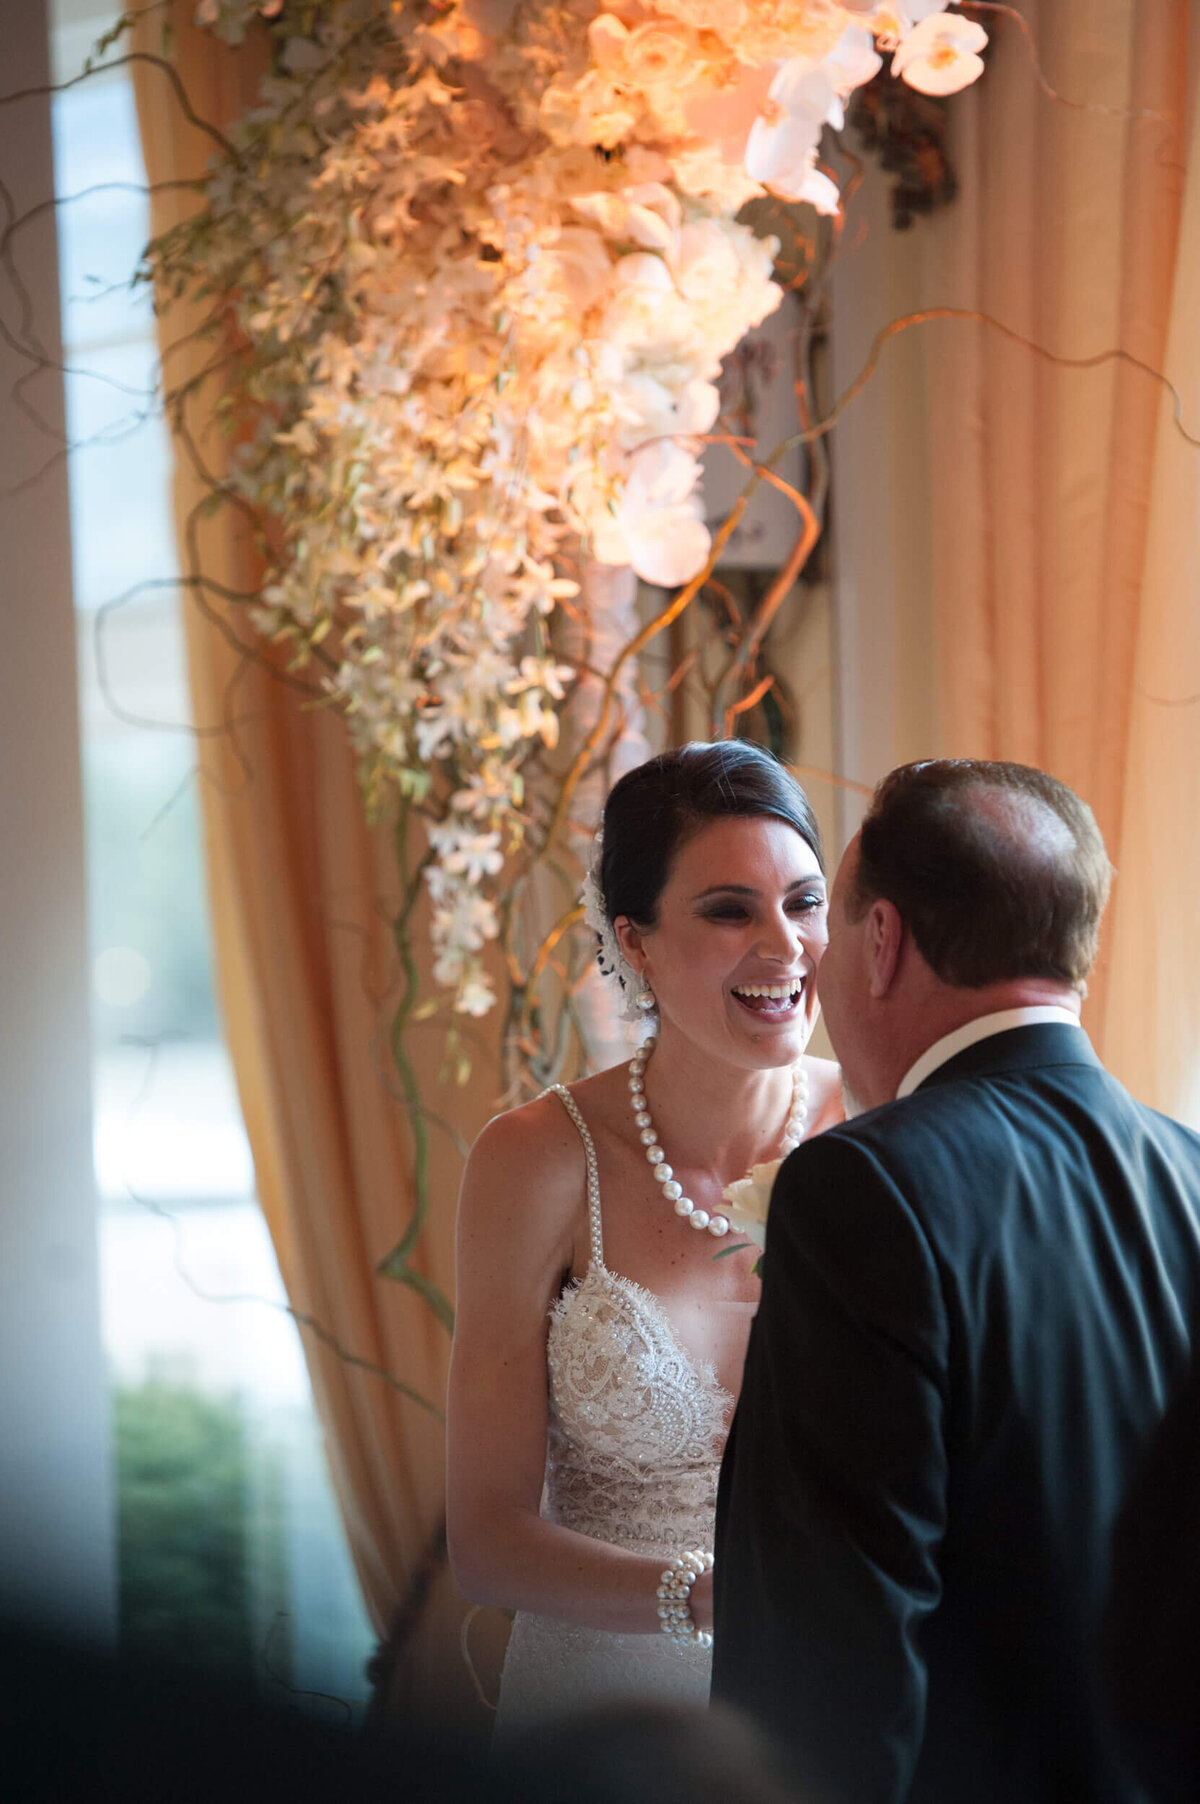 Bride smiles with delight as she looks at her groom